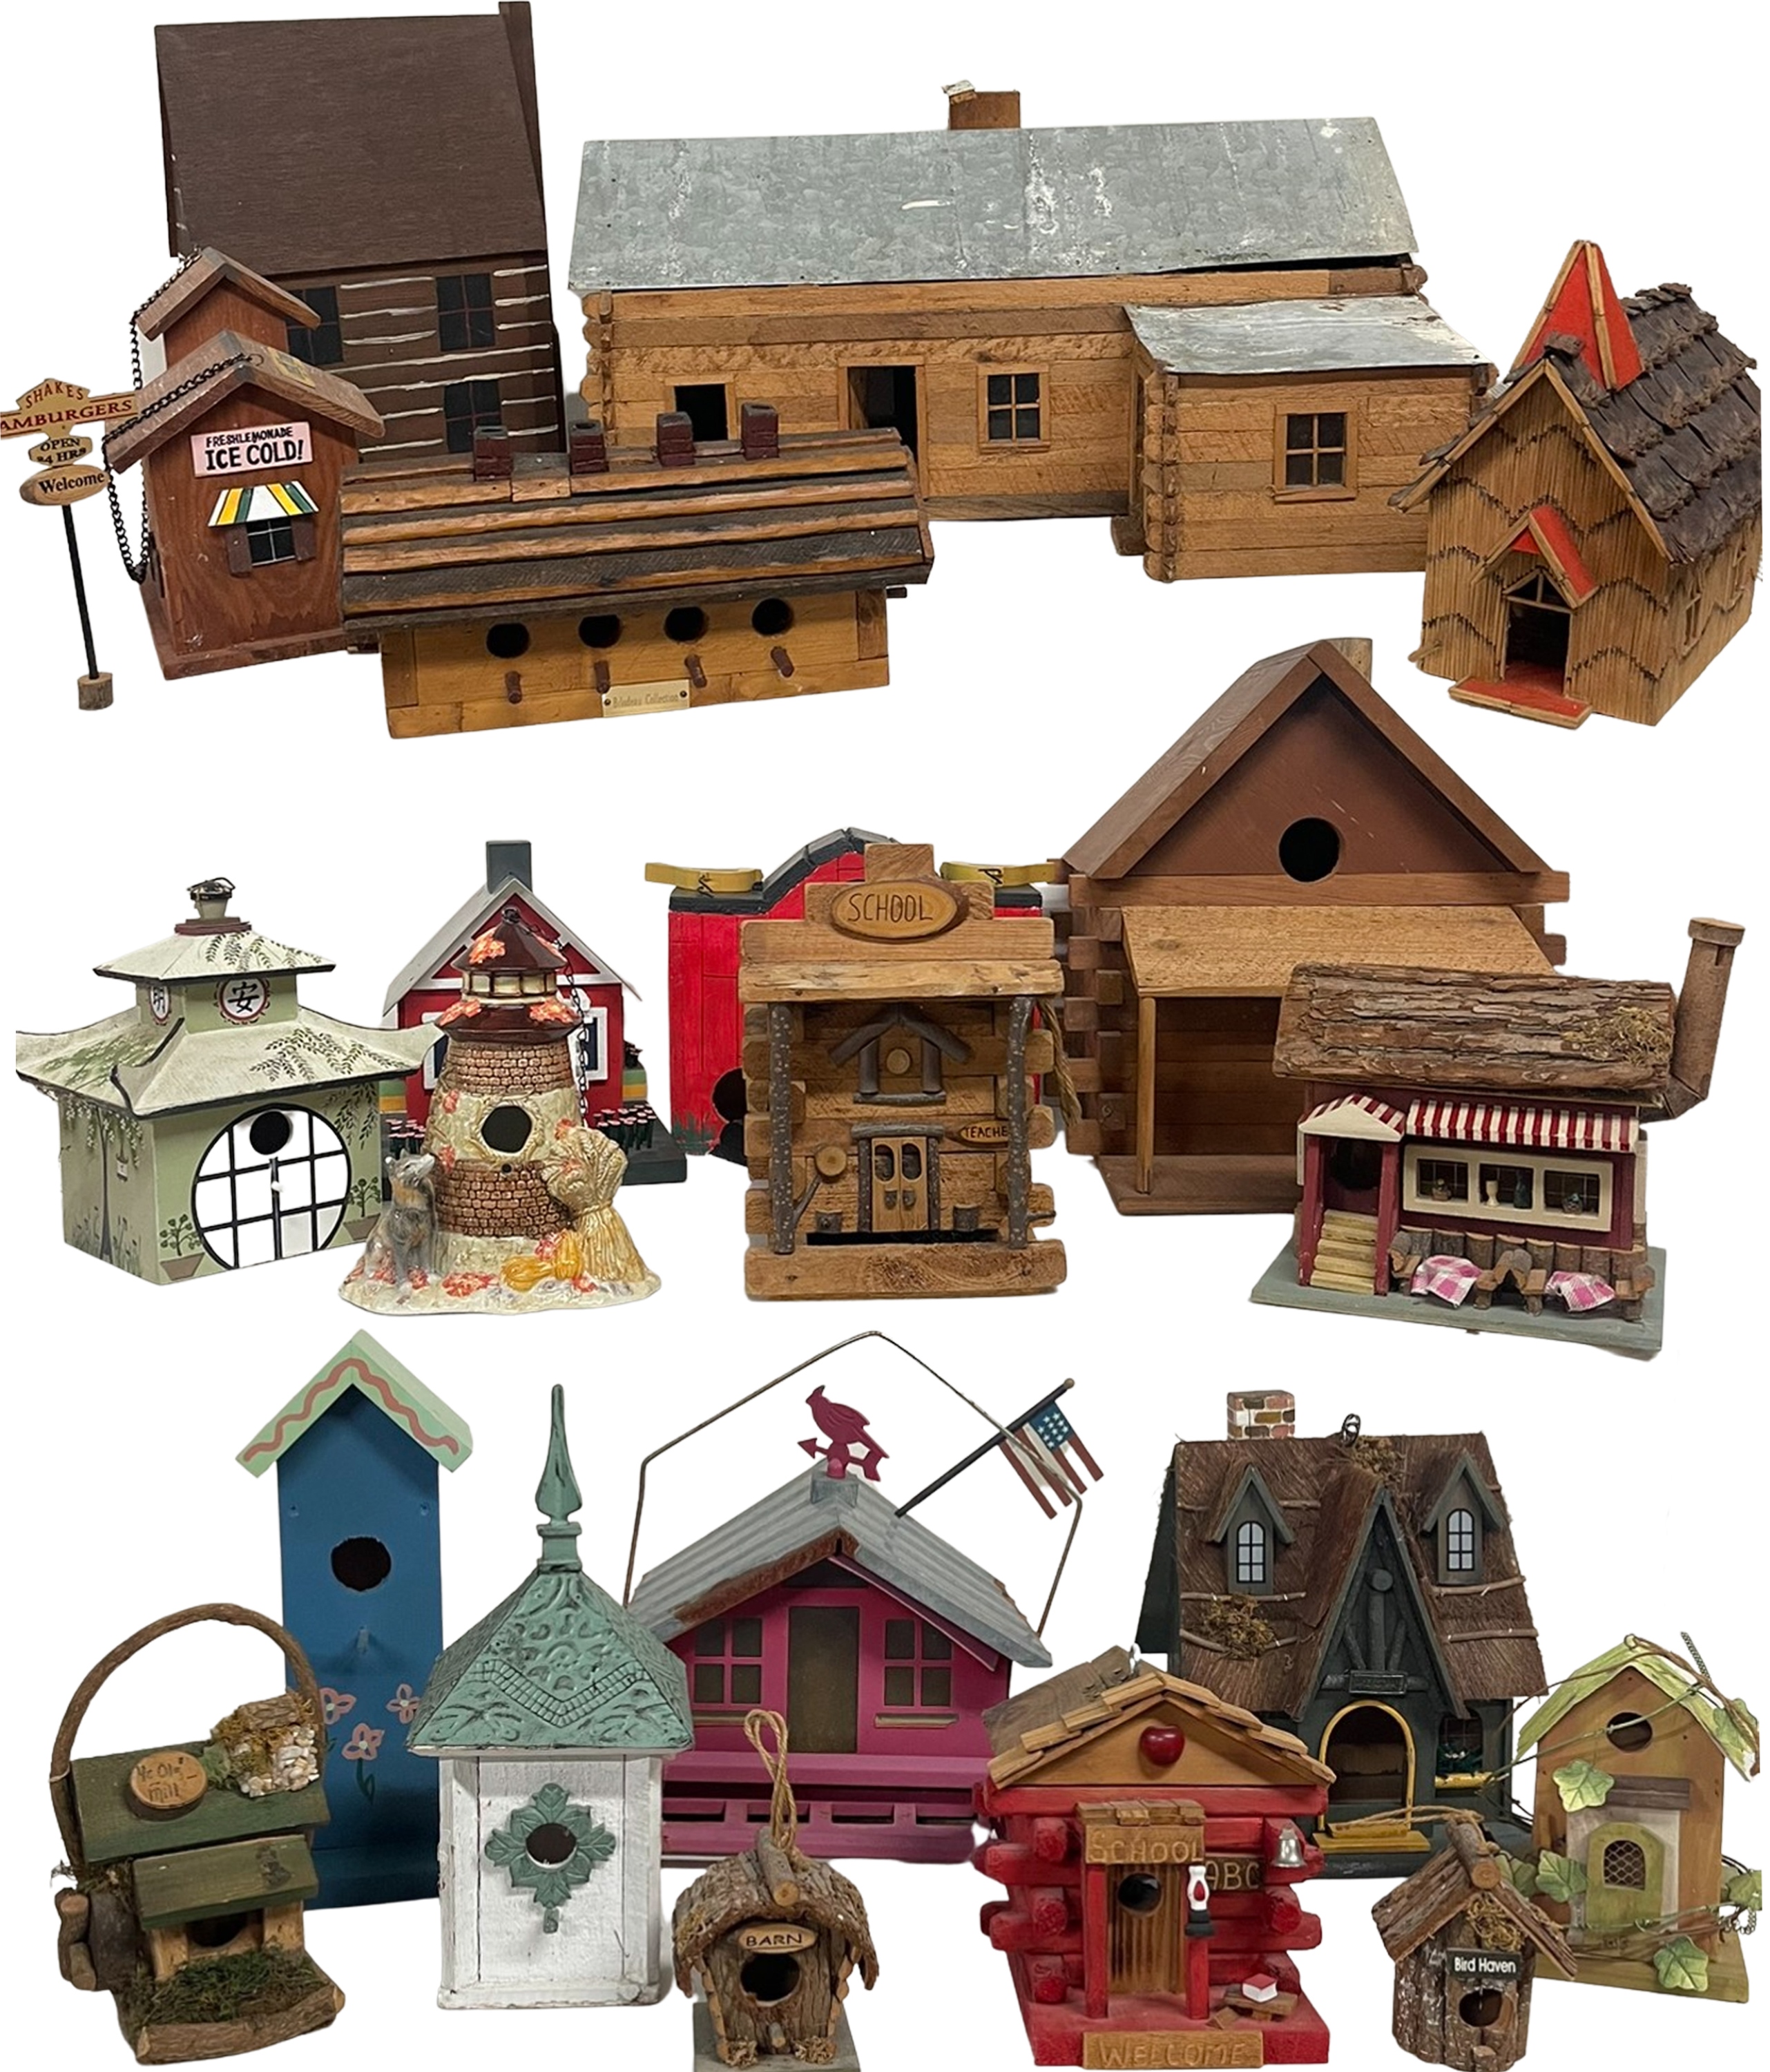 22 HAND CRAFTED BIRD HOUSES Collection